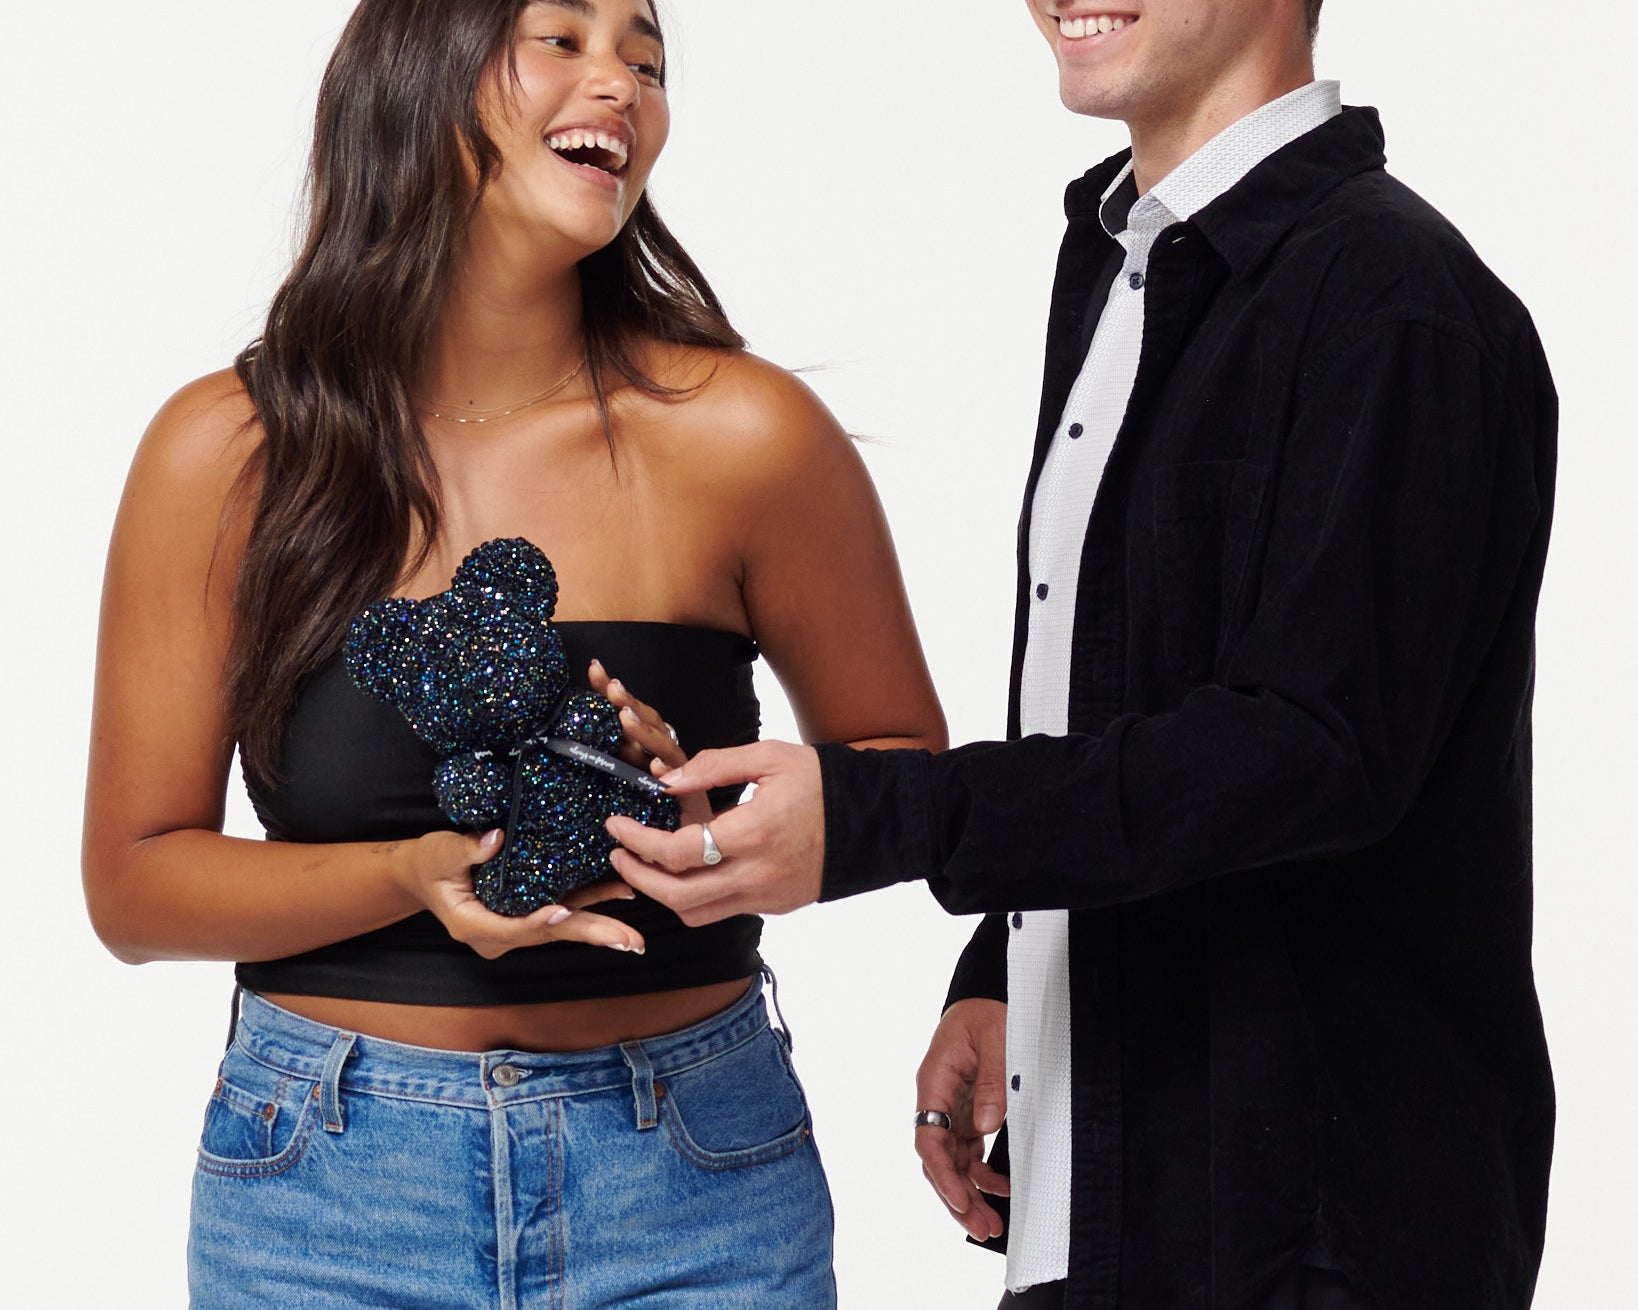 A woman in a black strapless top and jeans holds a glittery black flower bear, while a man in a black jacket over a white shirt smiles at her, touching the bear's paw. They both appear cheerful and are posing for the camera.